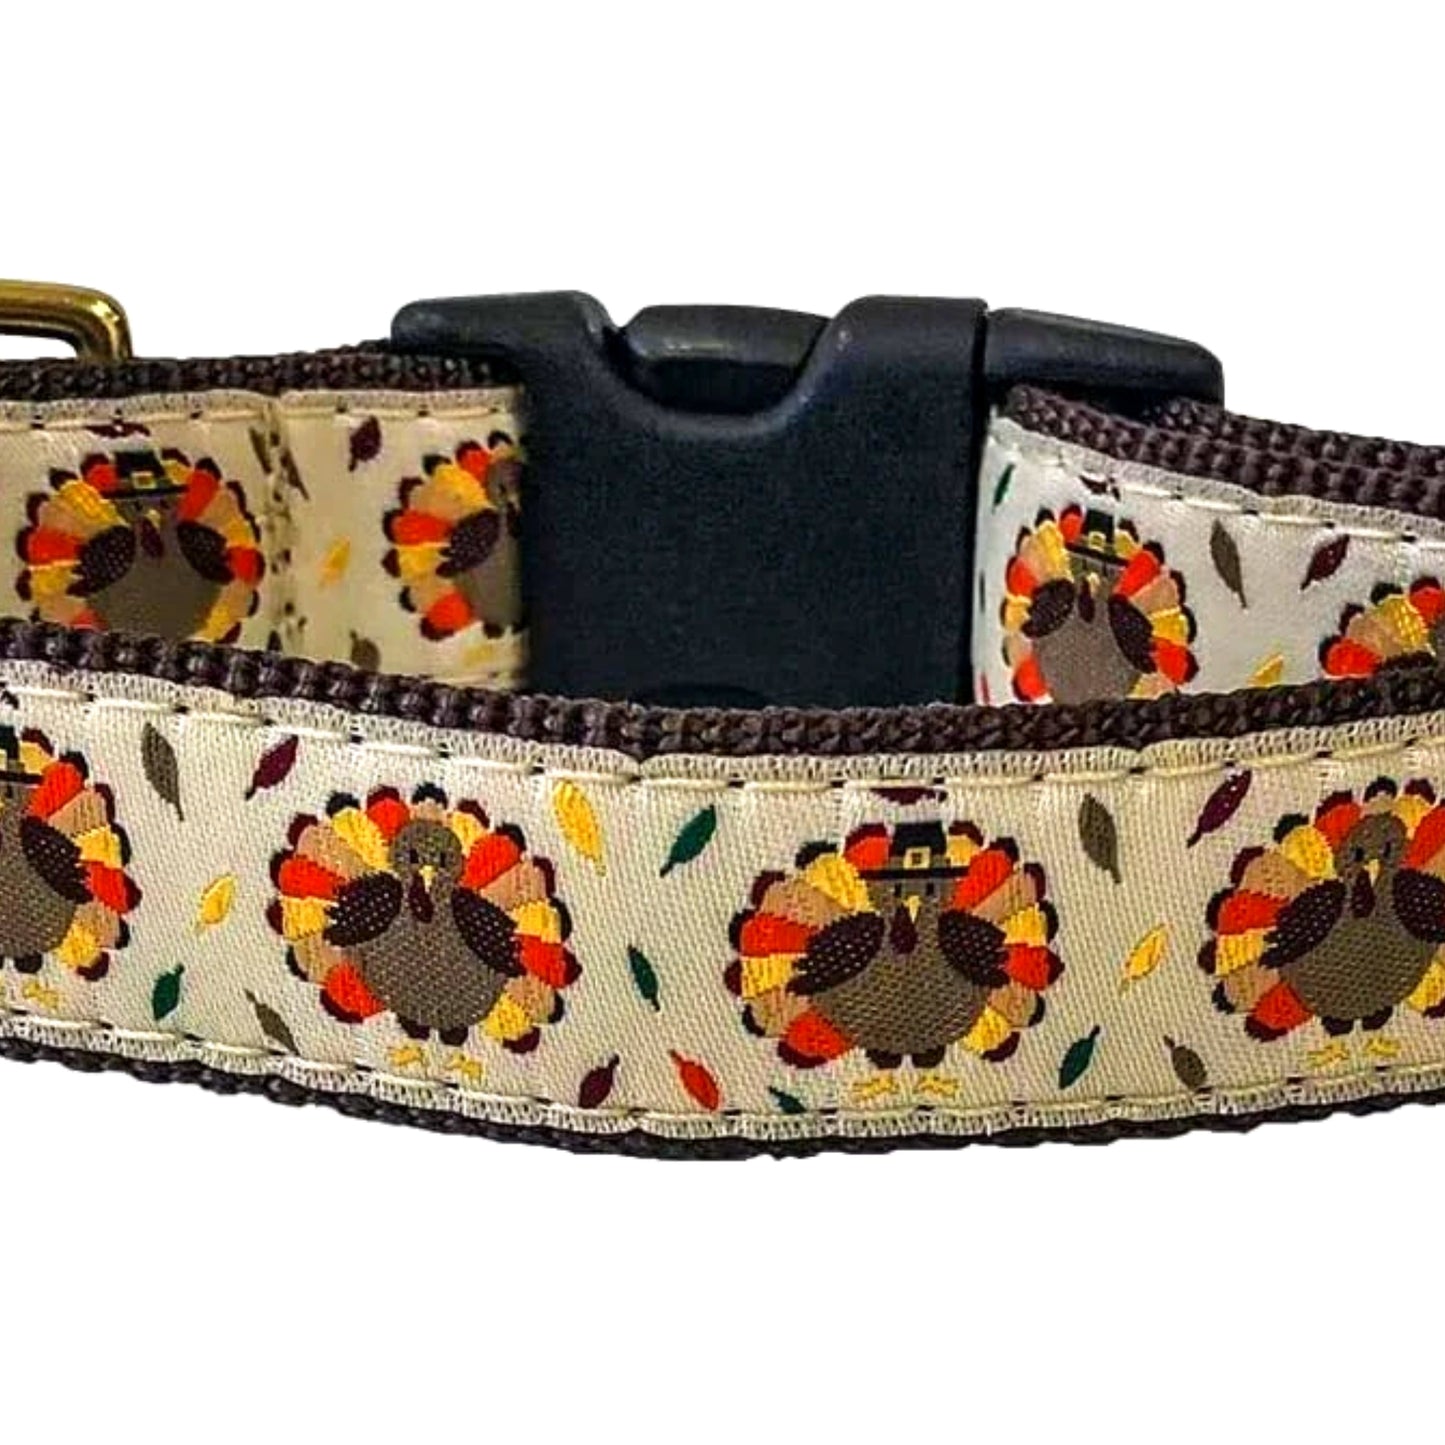 Midlee Thanksgiving Turkey Buckle Dog Collar- Made in The USA